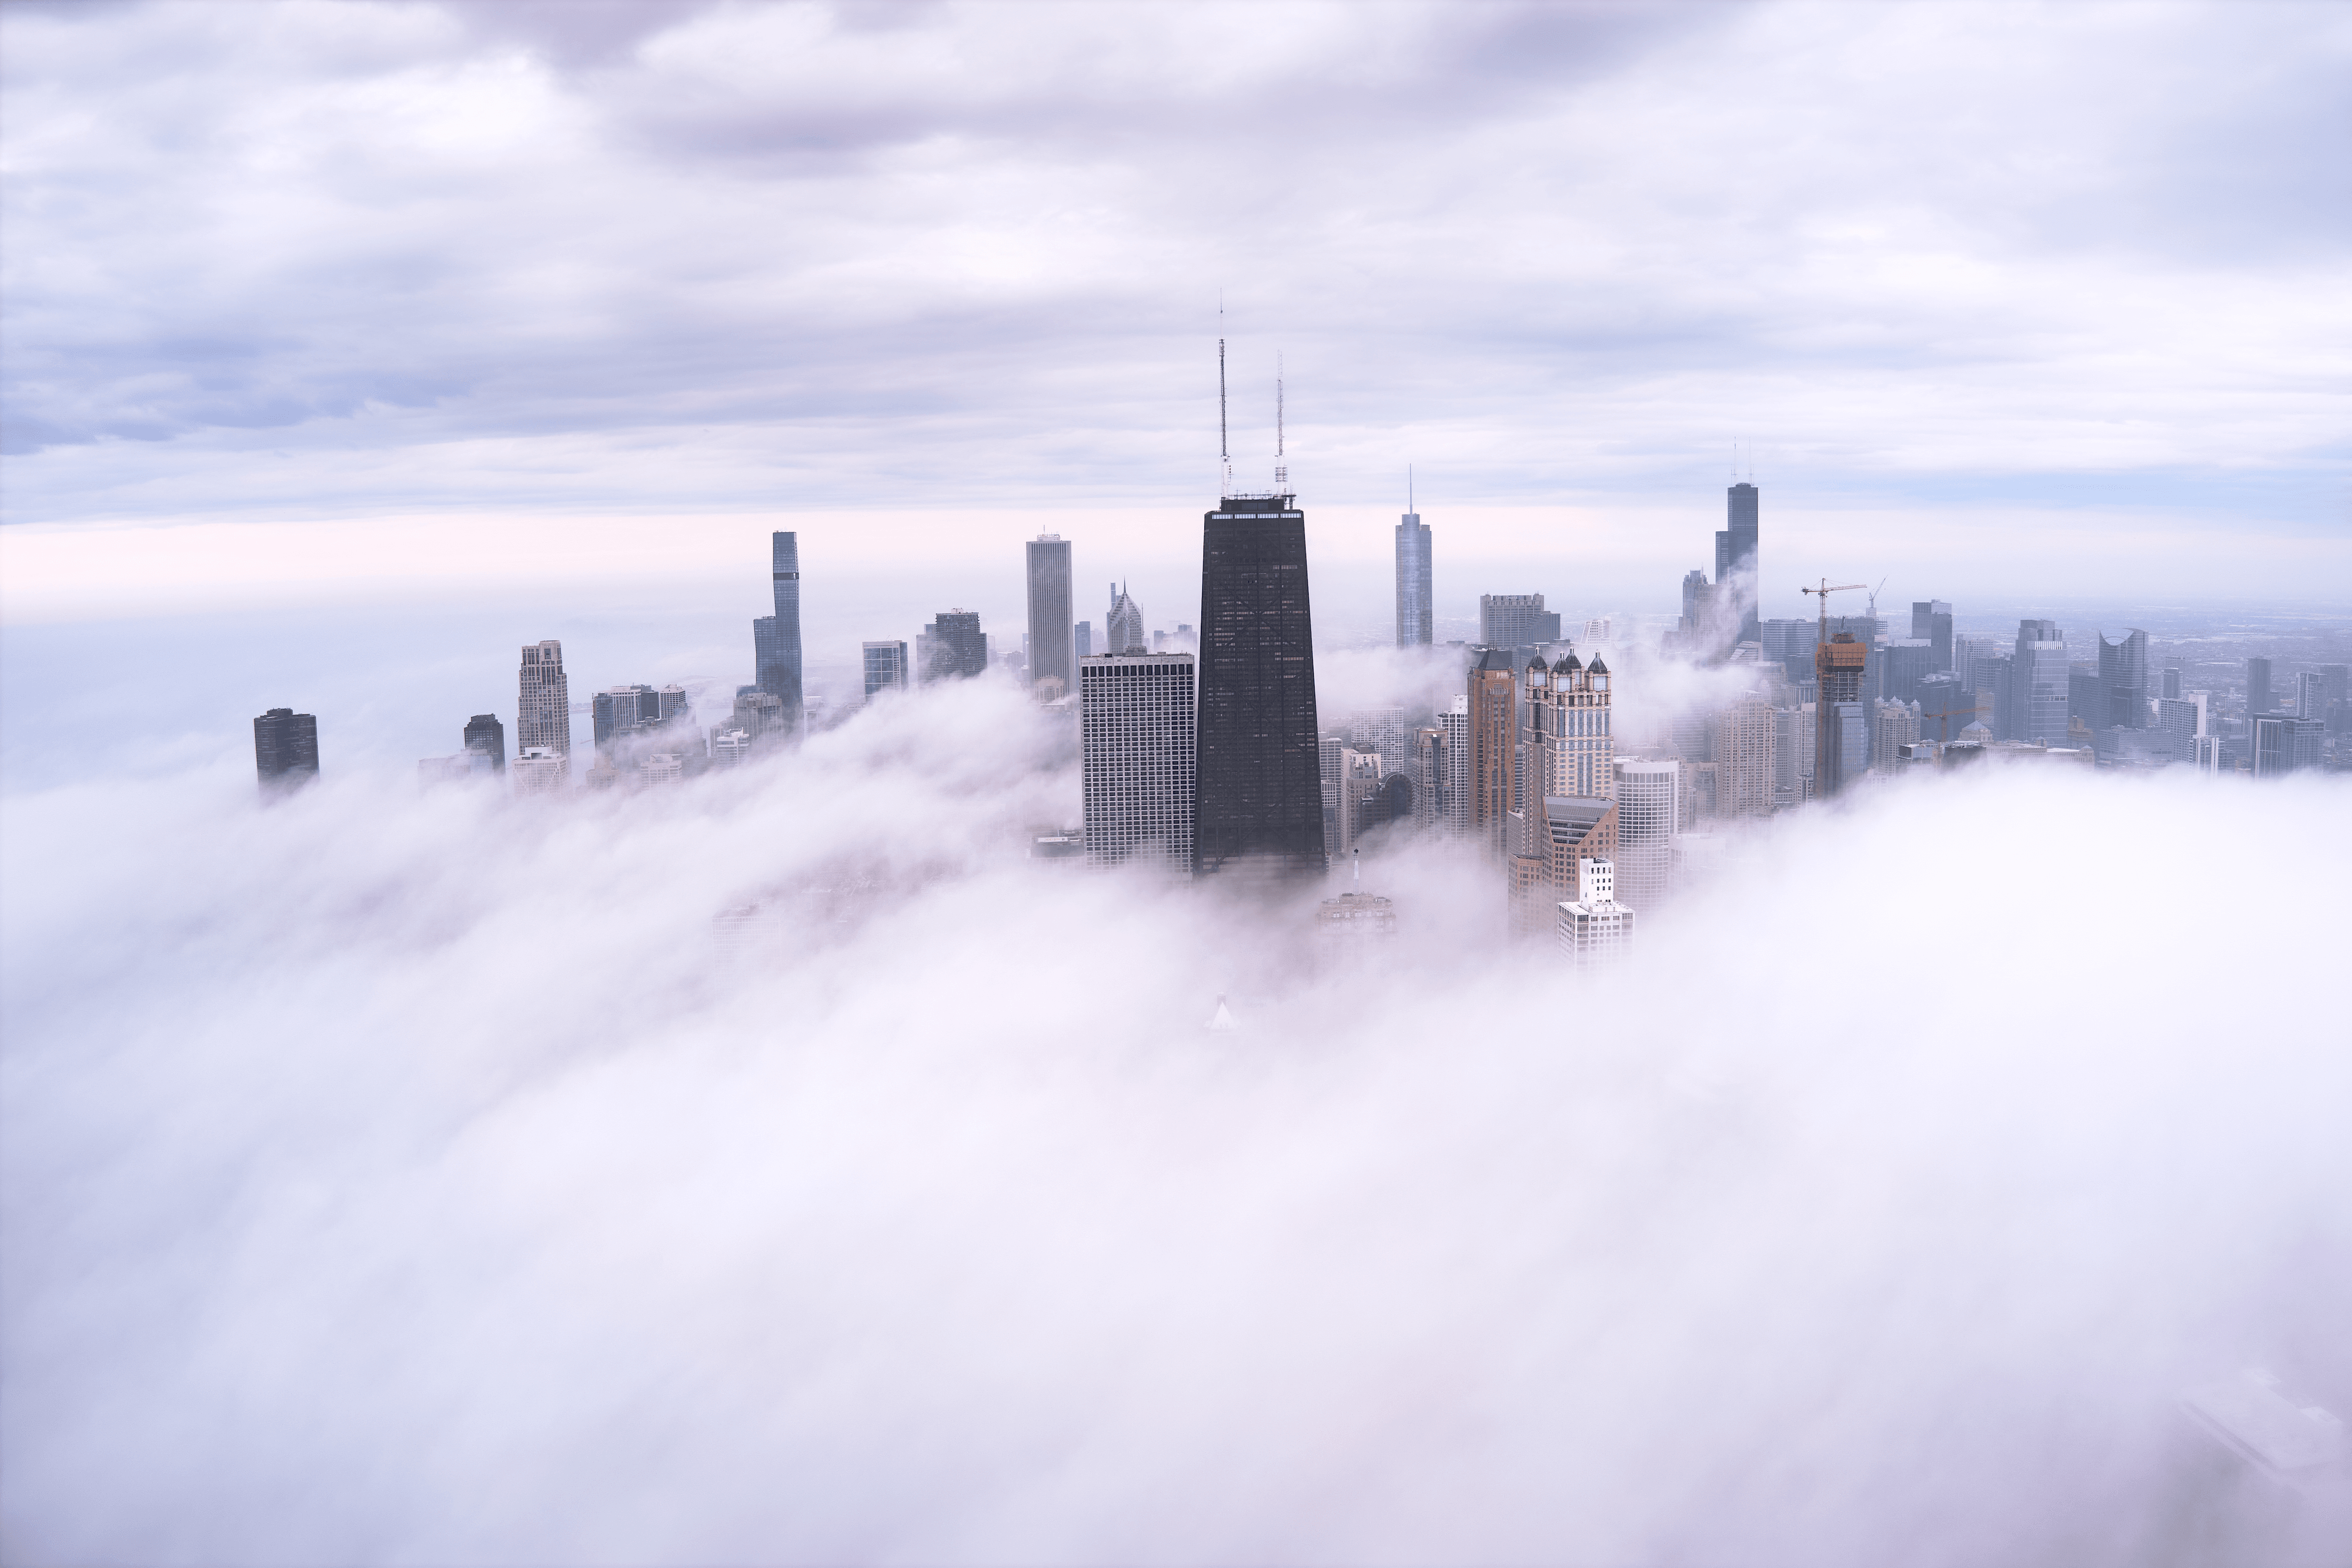 City in the clouds #27